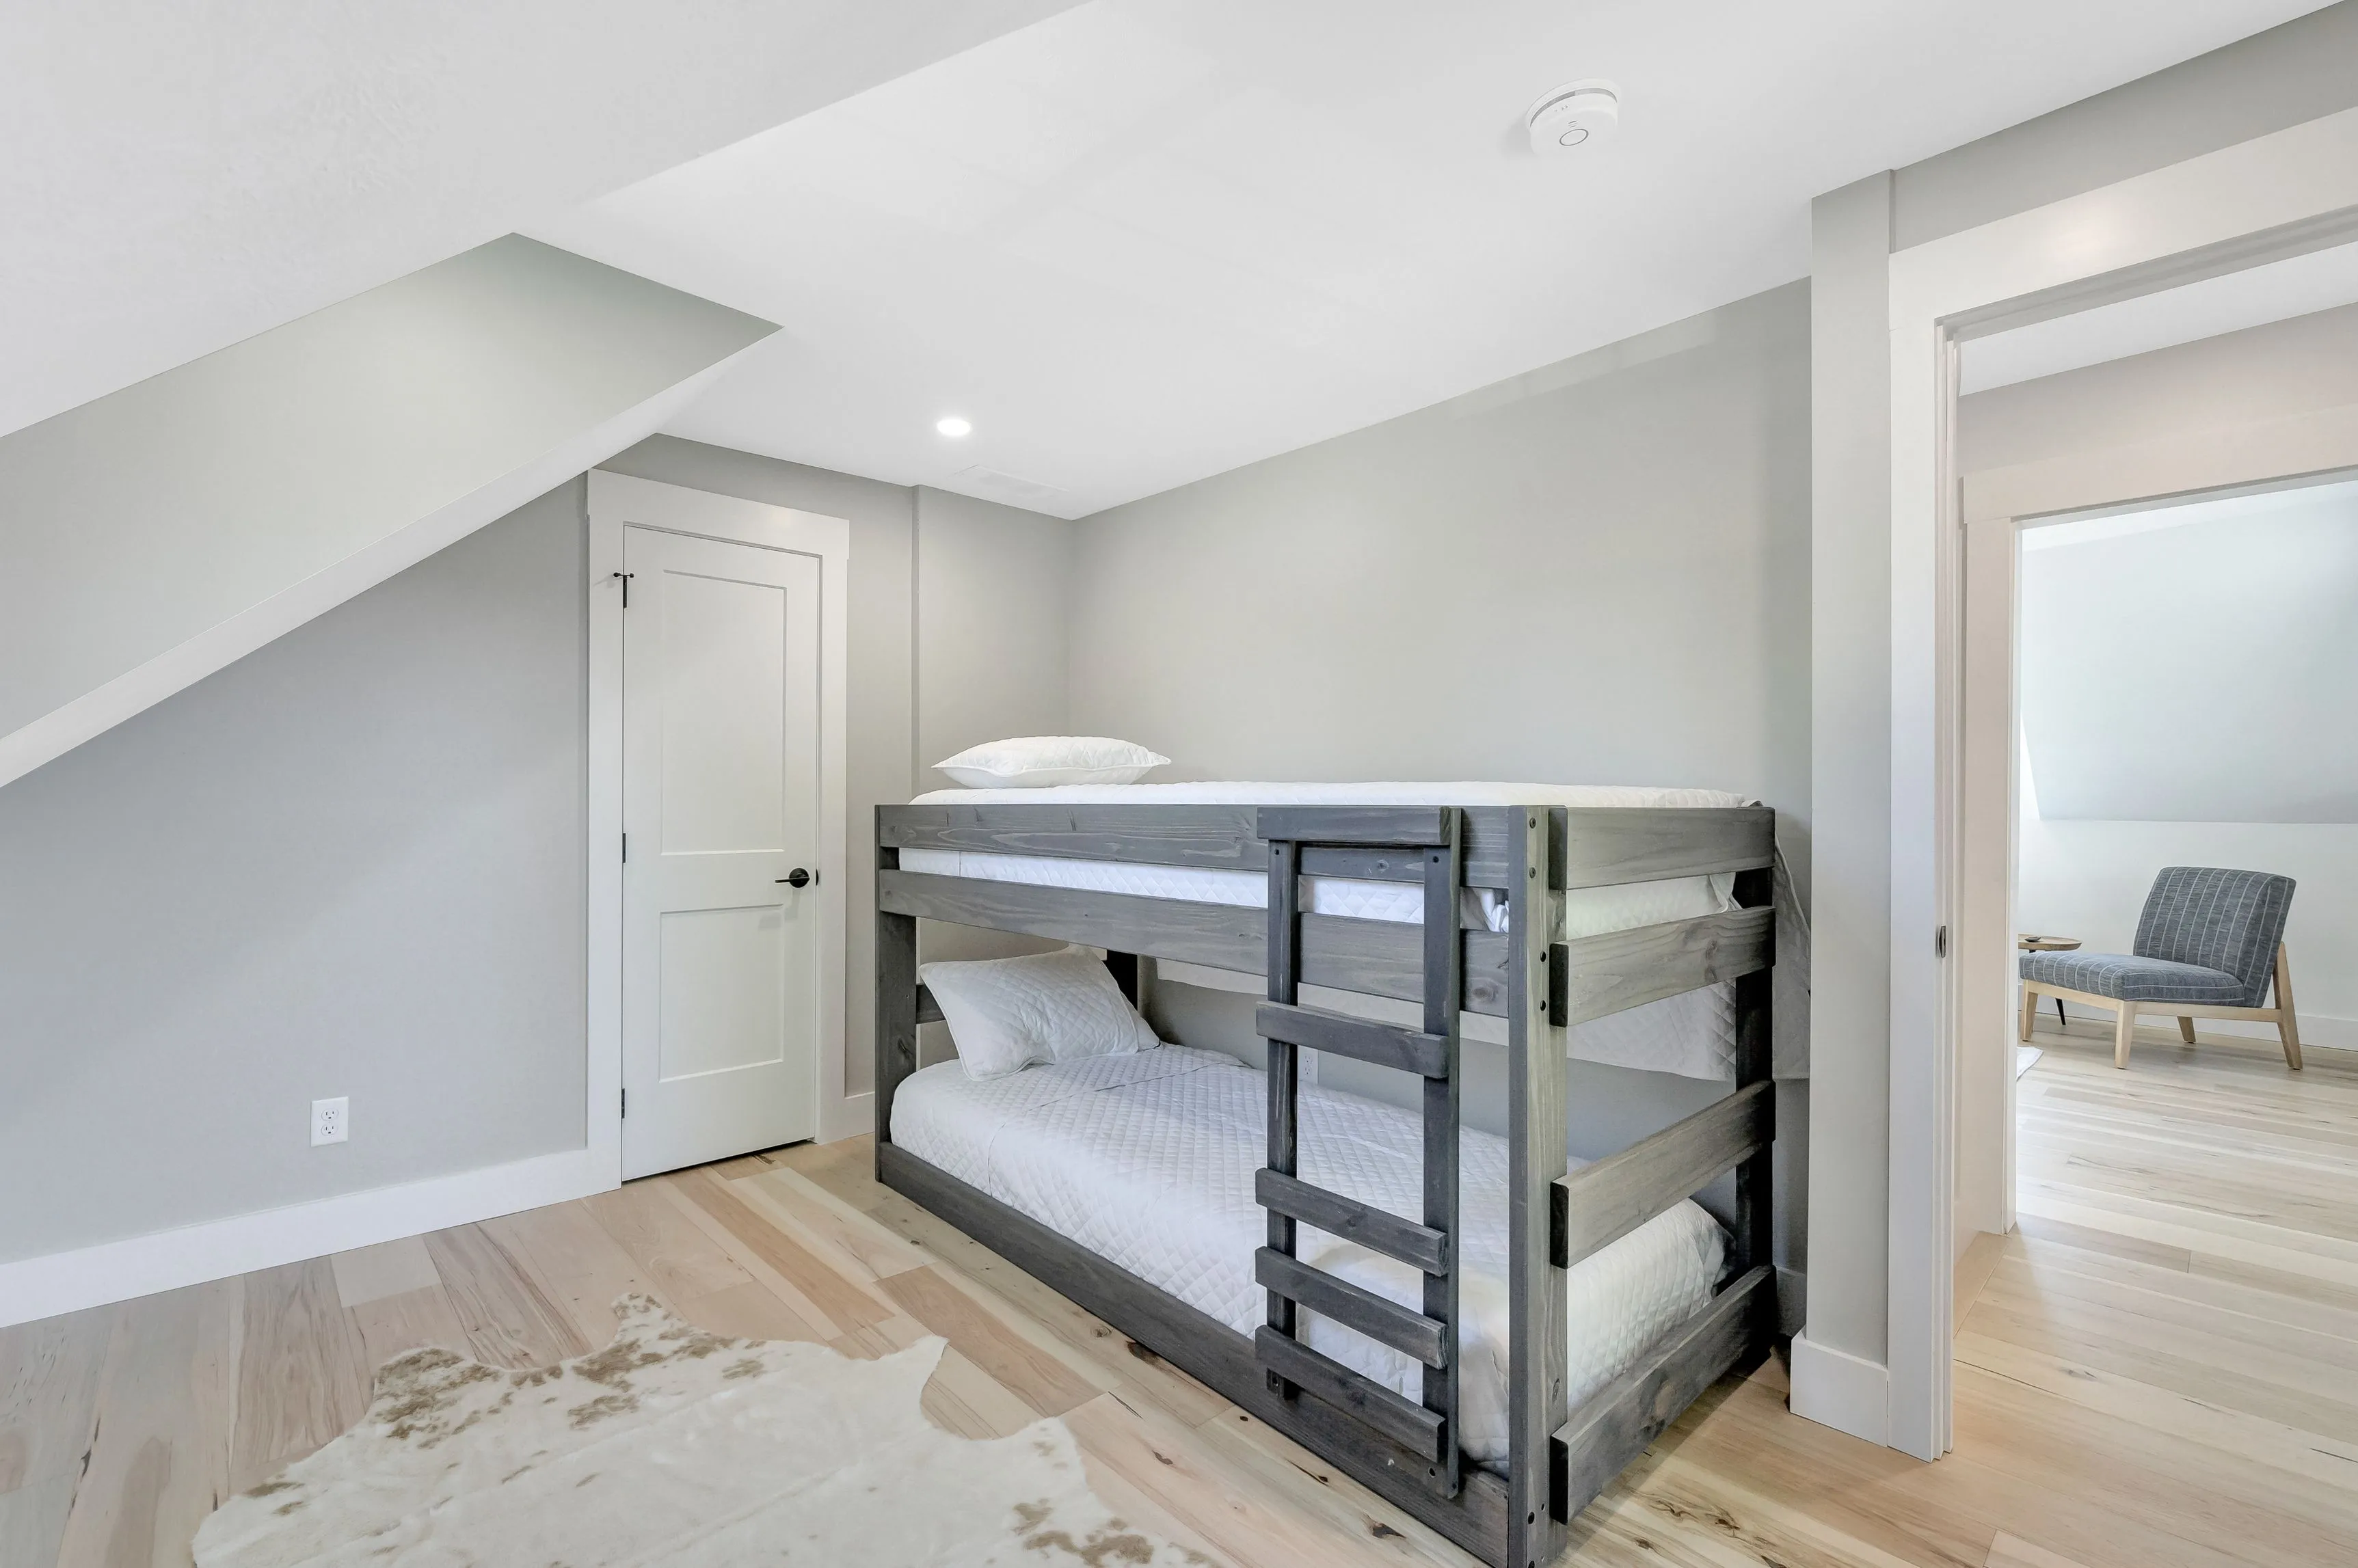 A contemporary room with a wooden bunk bed, white bedding, light hardwood floors, and a small chair by the doorway.